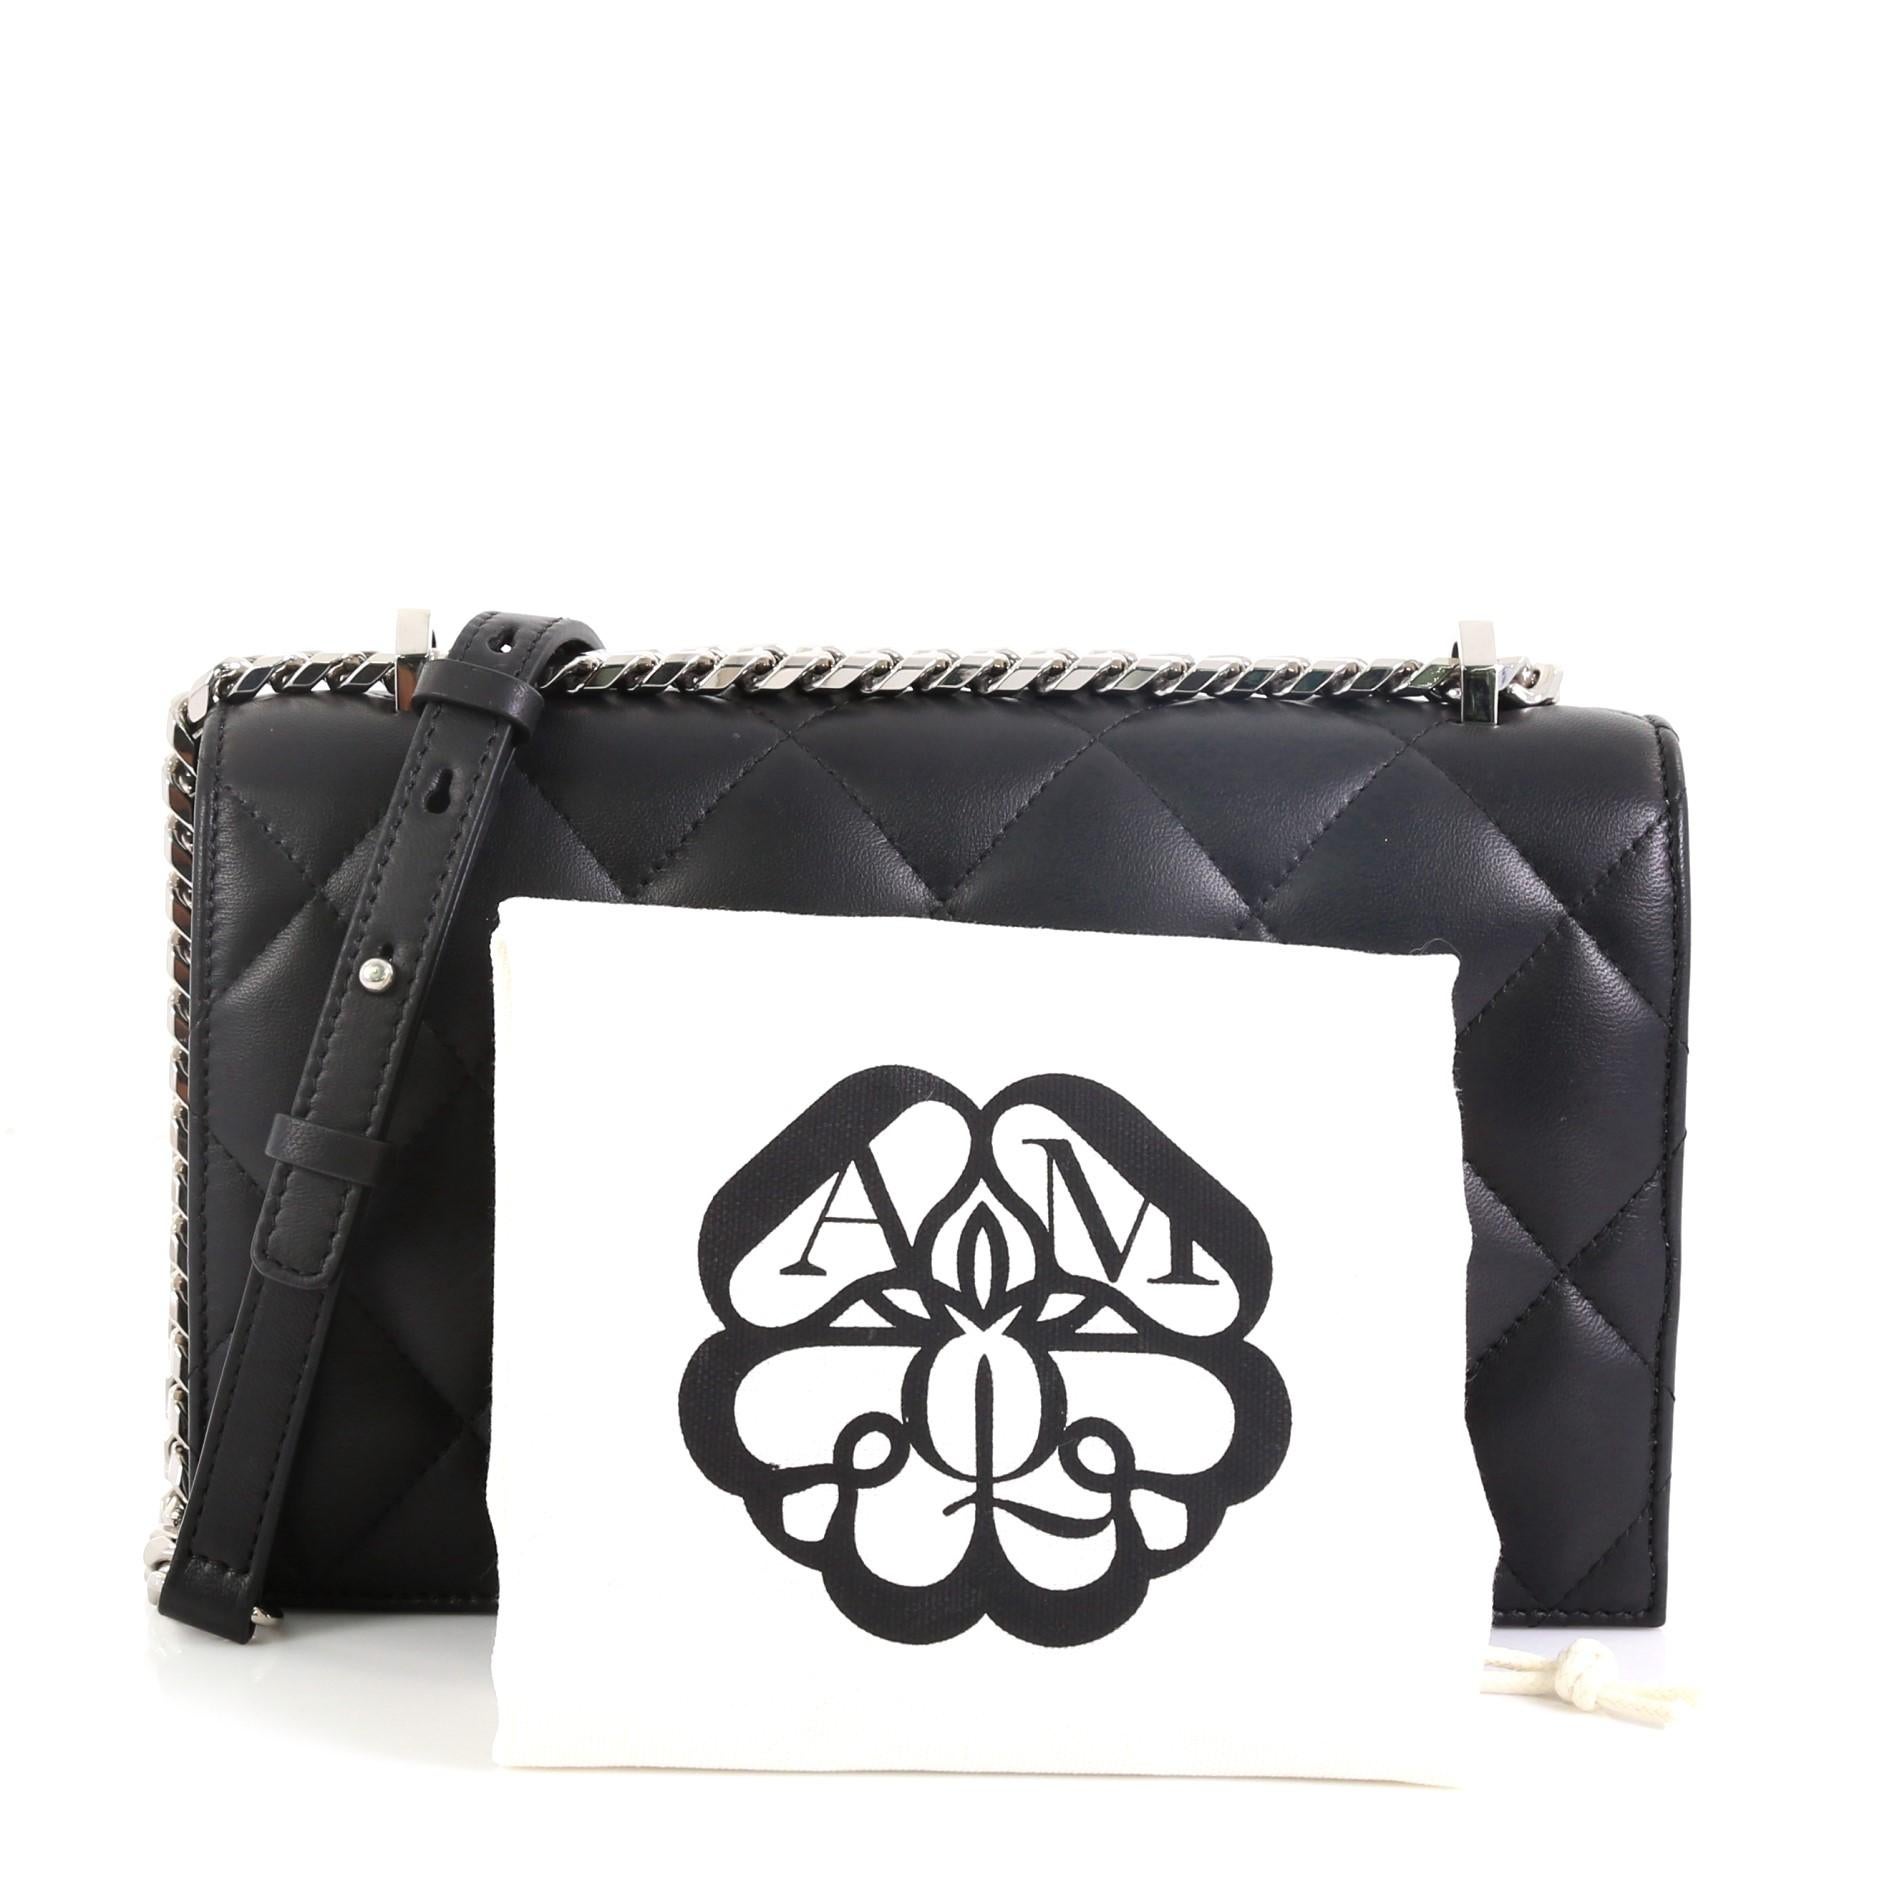 This Alexander McQueen Jewelled Flap Satchel Quilted Leather Medium, crafted in black quilted leather, features chain link and leather strap, skull and crystal embellished knuckle duster, and silver-tone hardware. Its magnetic snap button closure